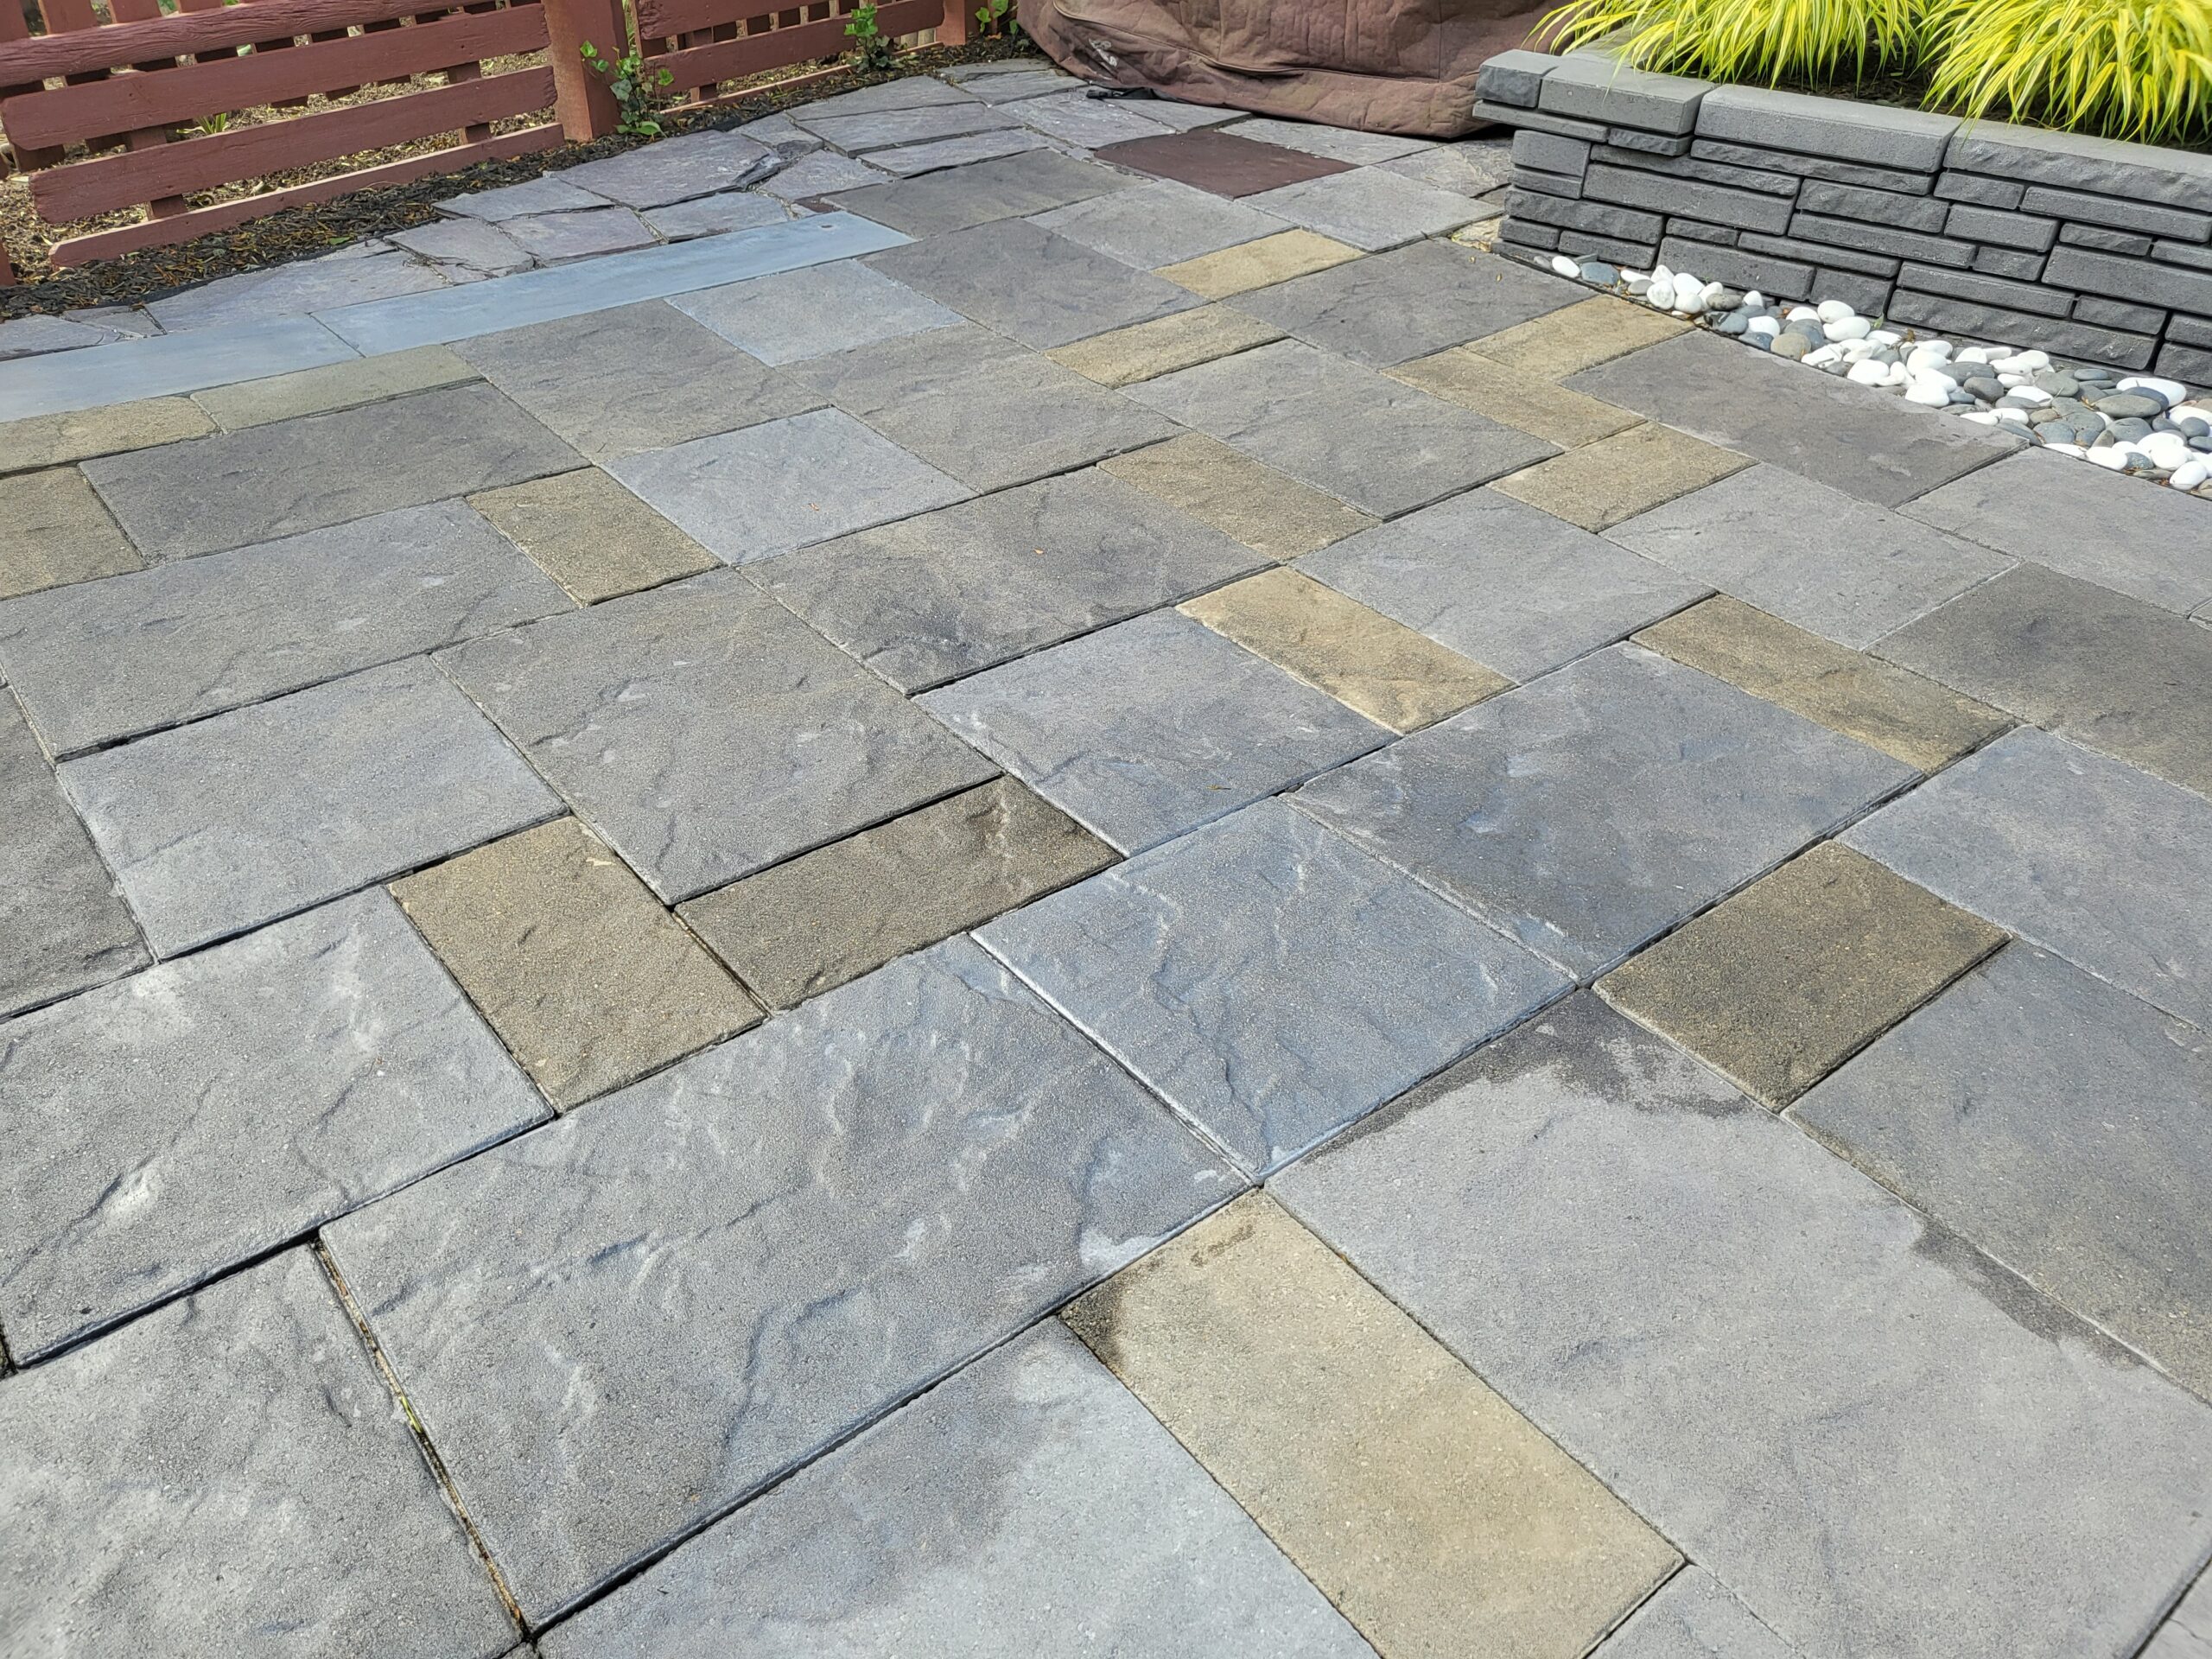 Concrete patio stained to look like slate